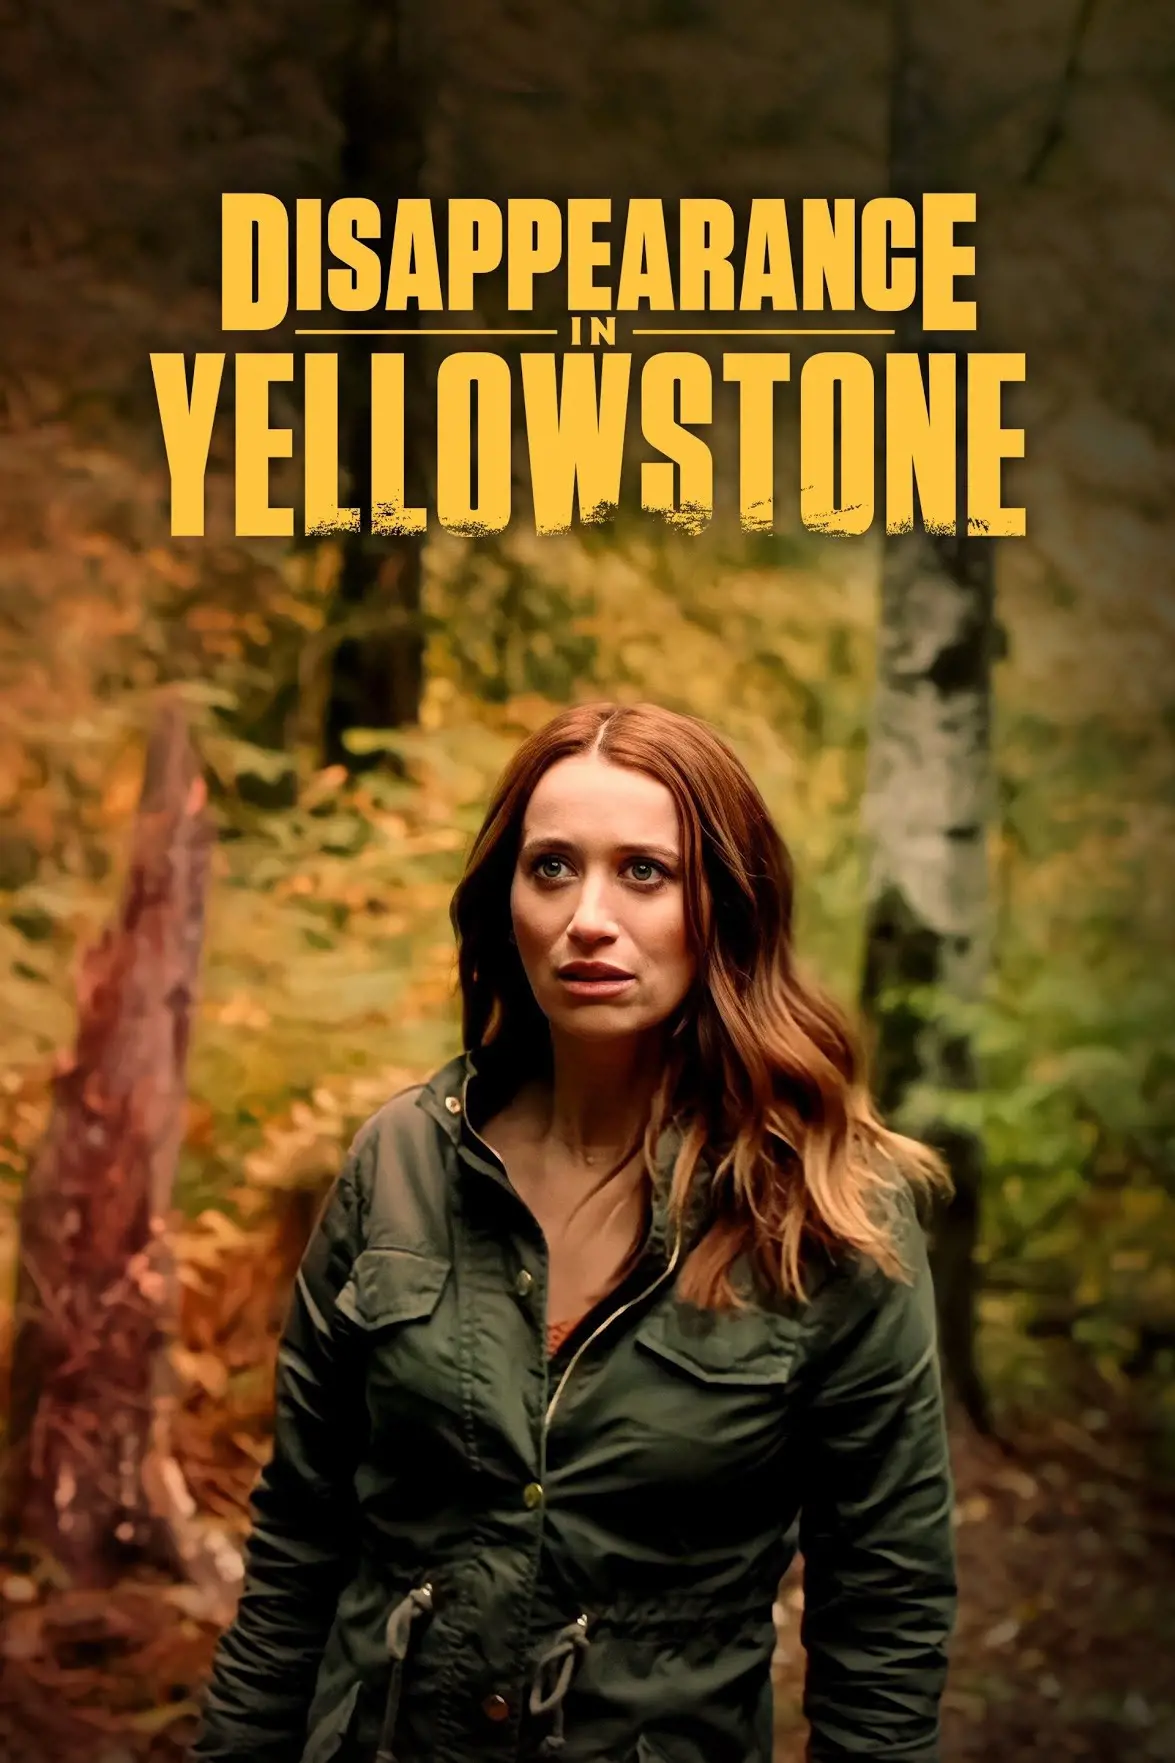 Disappearance in Yellowstone was released on May 21, 2022 